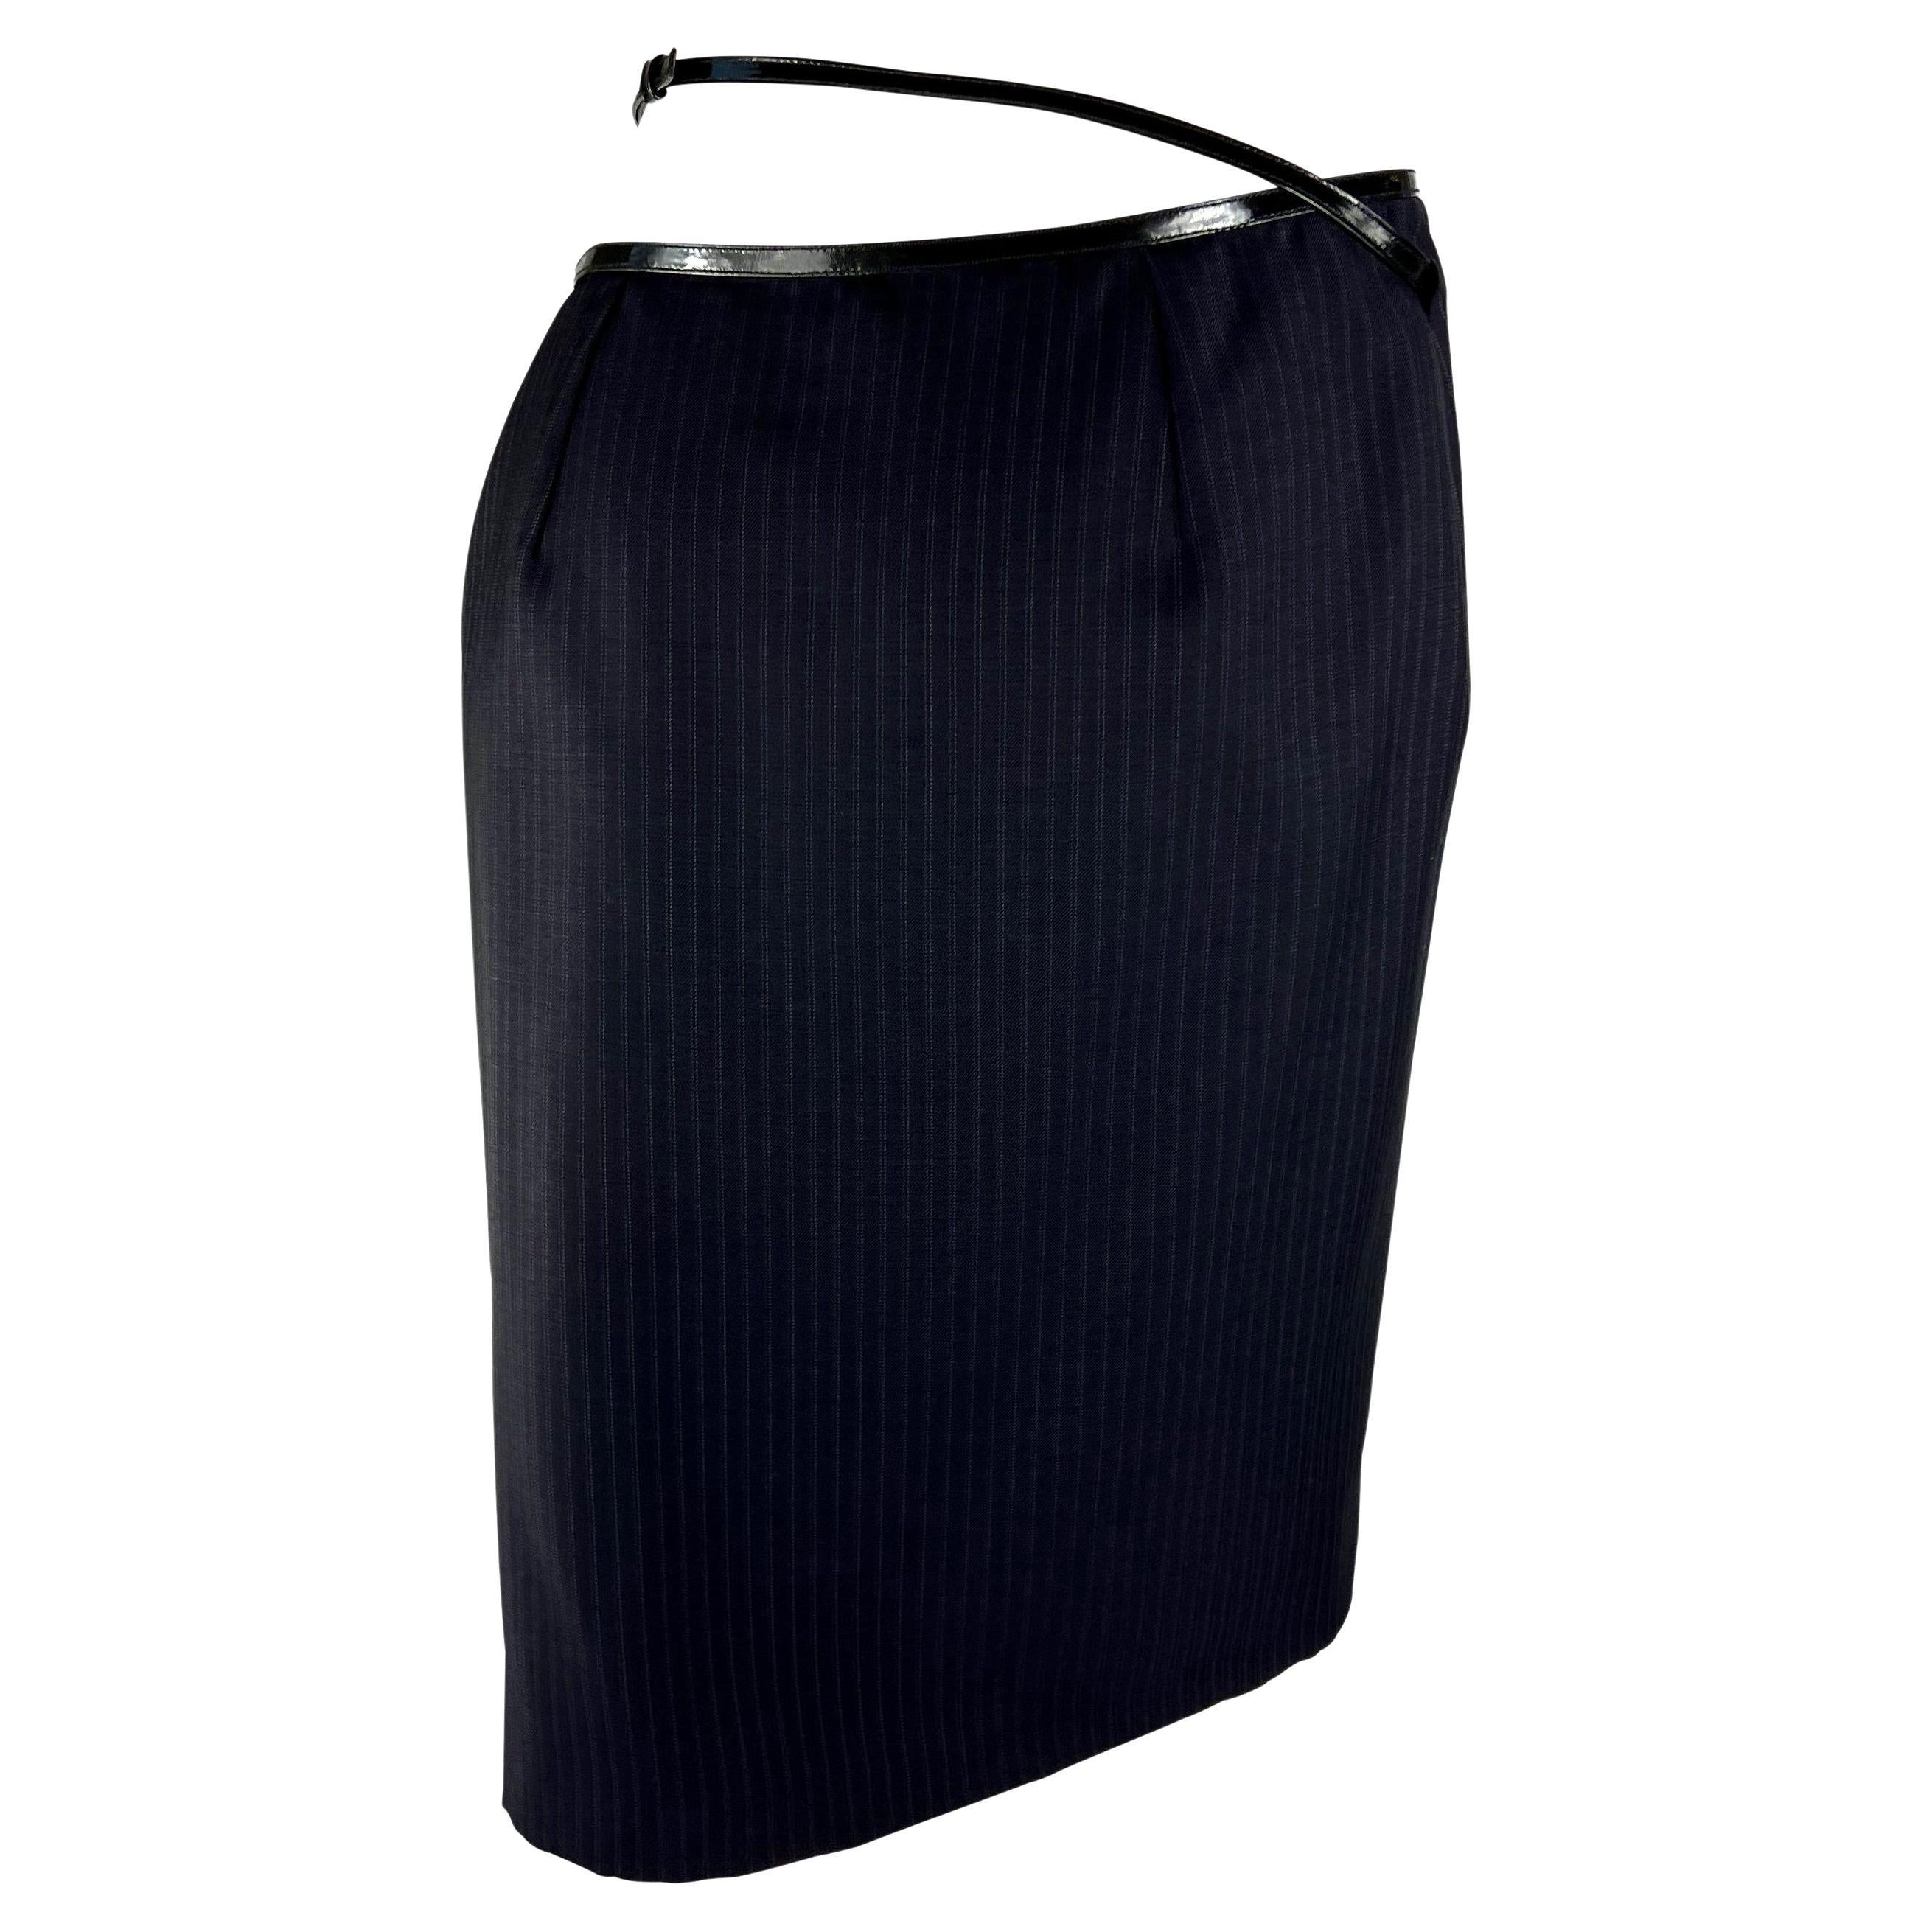 F/W 1997 Gucci by Tom Ford Runway Patent G Buckle Navy Pinstripe Wrap Skirt 2